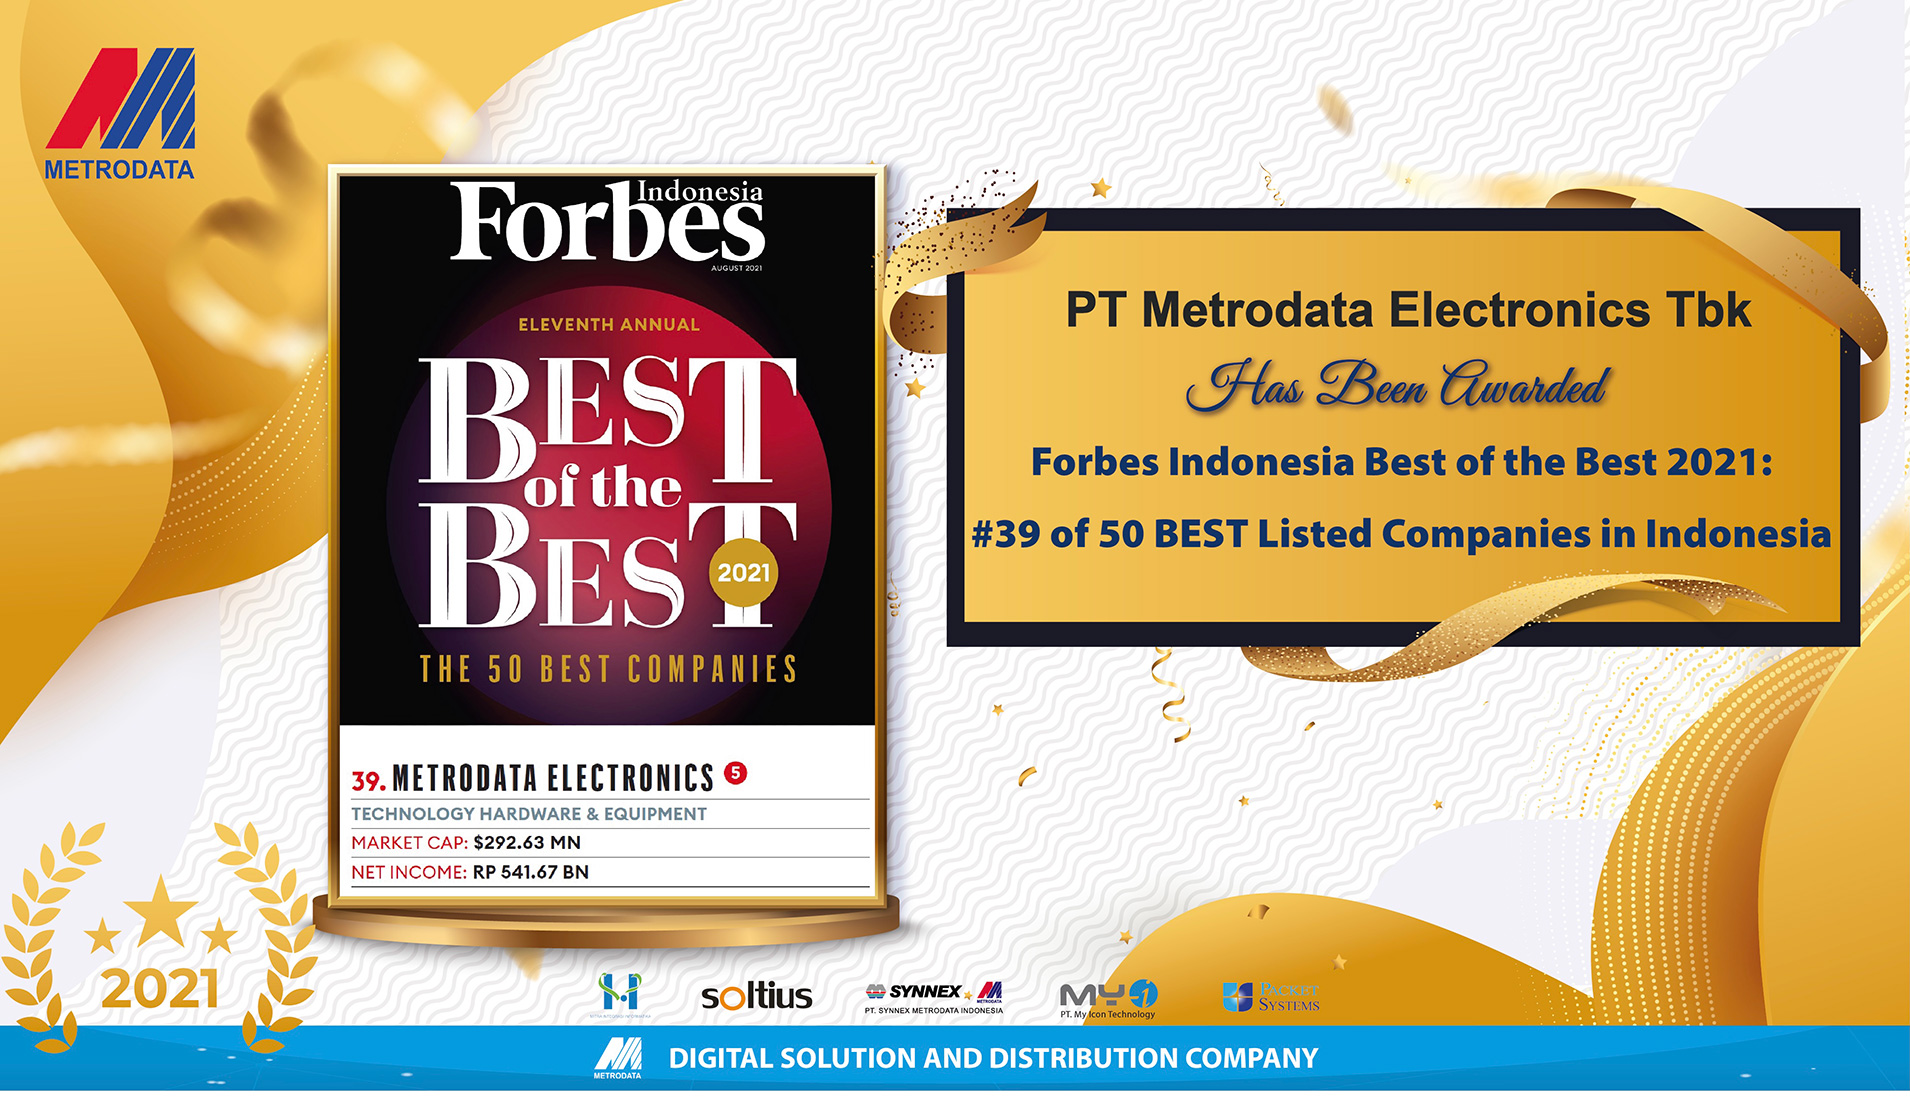 Metrodata Raih Forbes Best Of The Best 2021: The 50 Best Companies